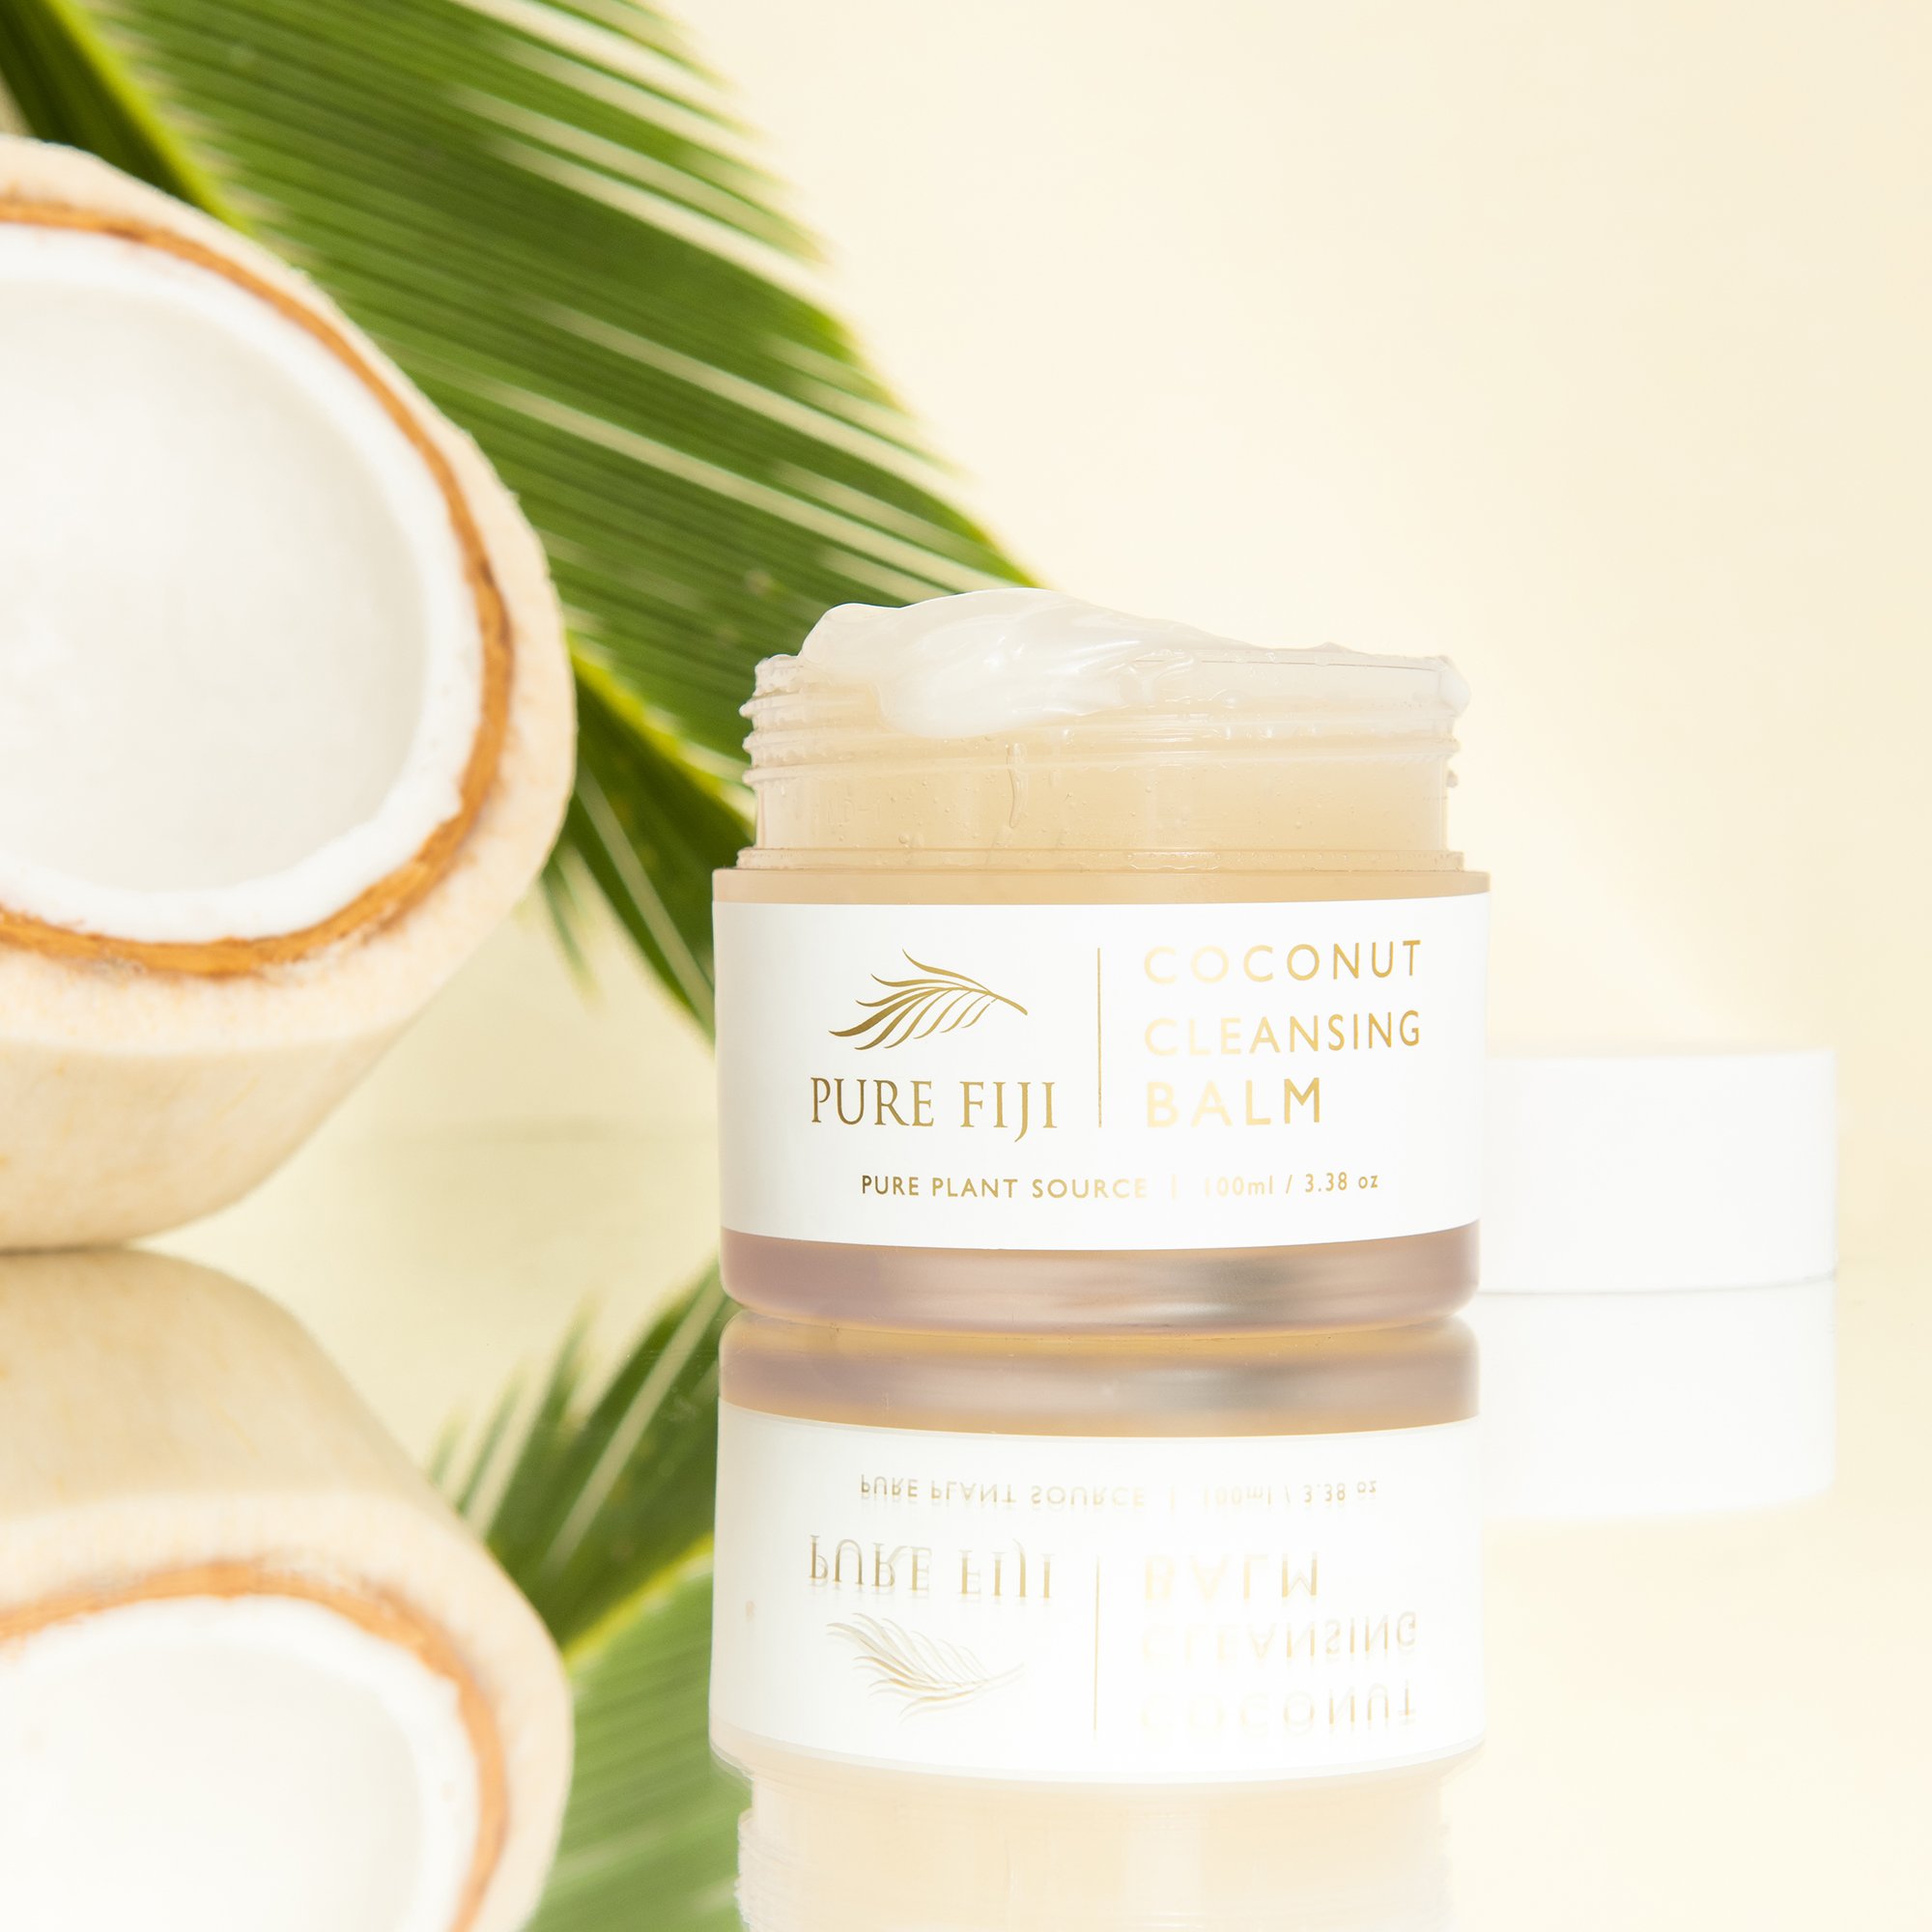 Coconut Cleansing Balm (Copy)